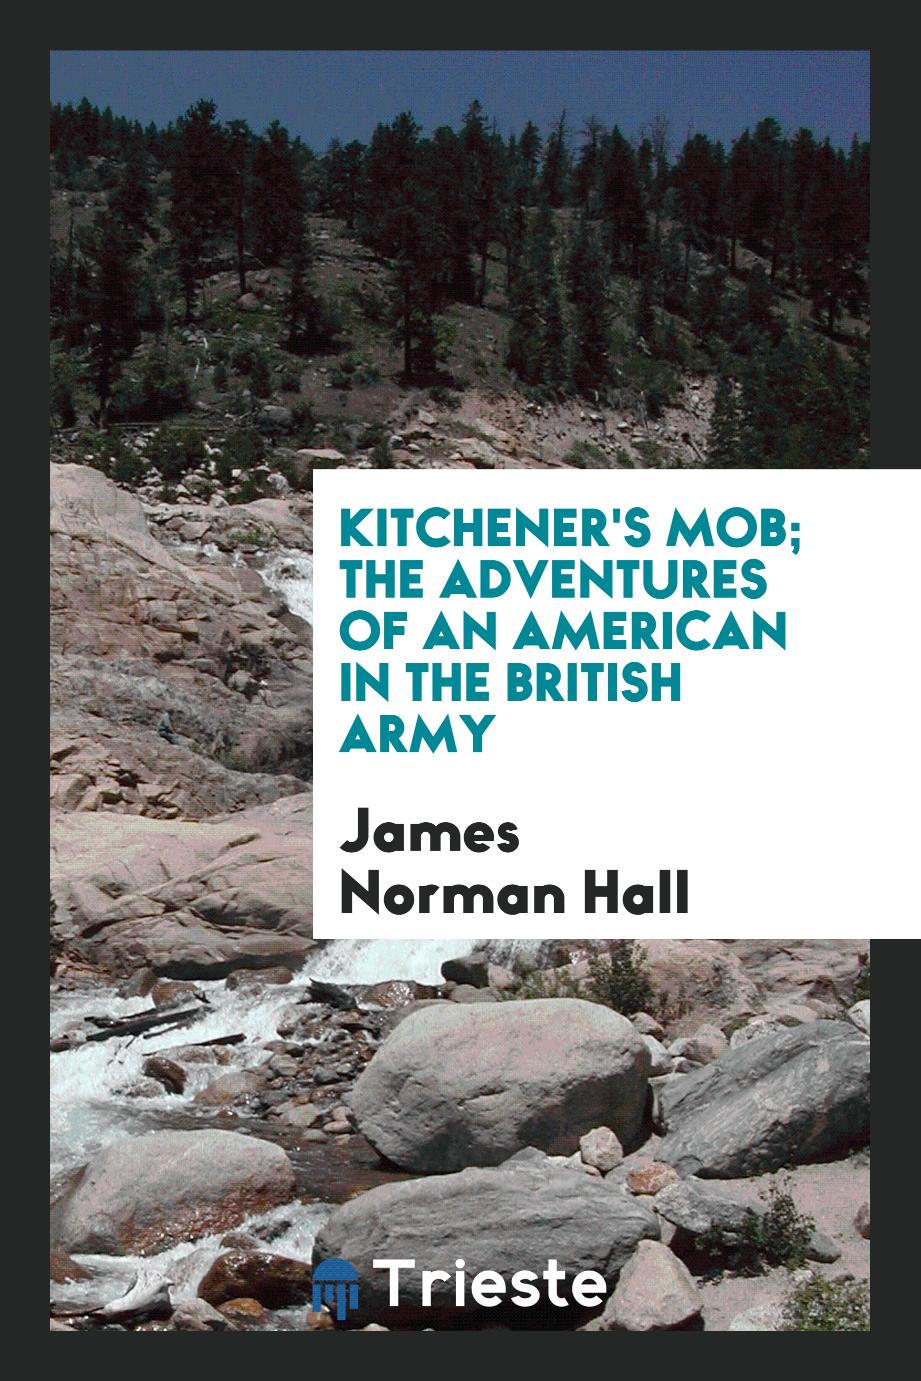 Kitchener's mob; the adventures of an American in the British army